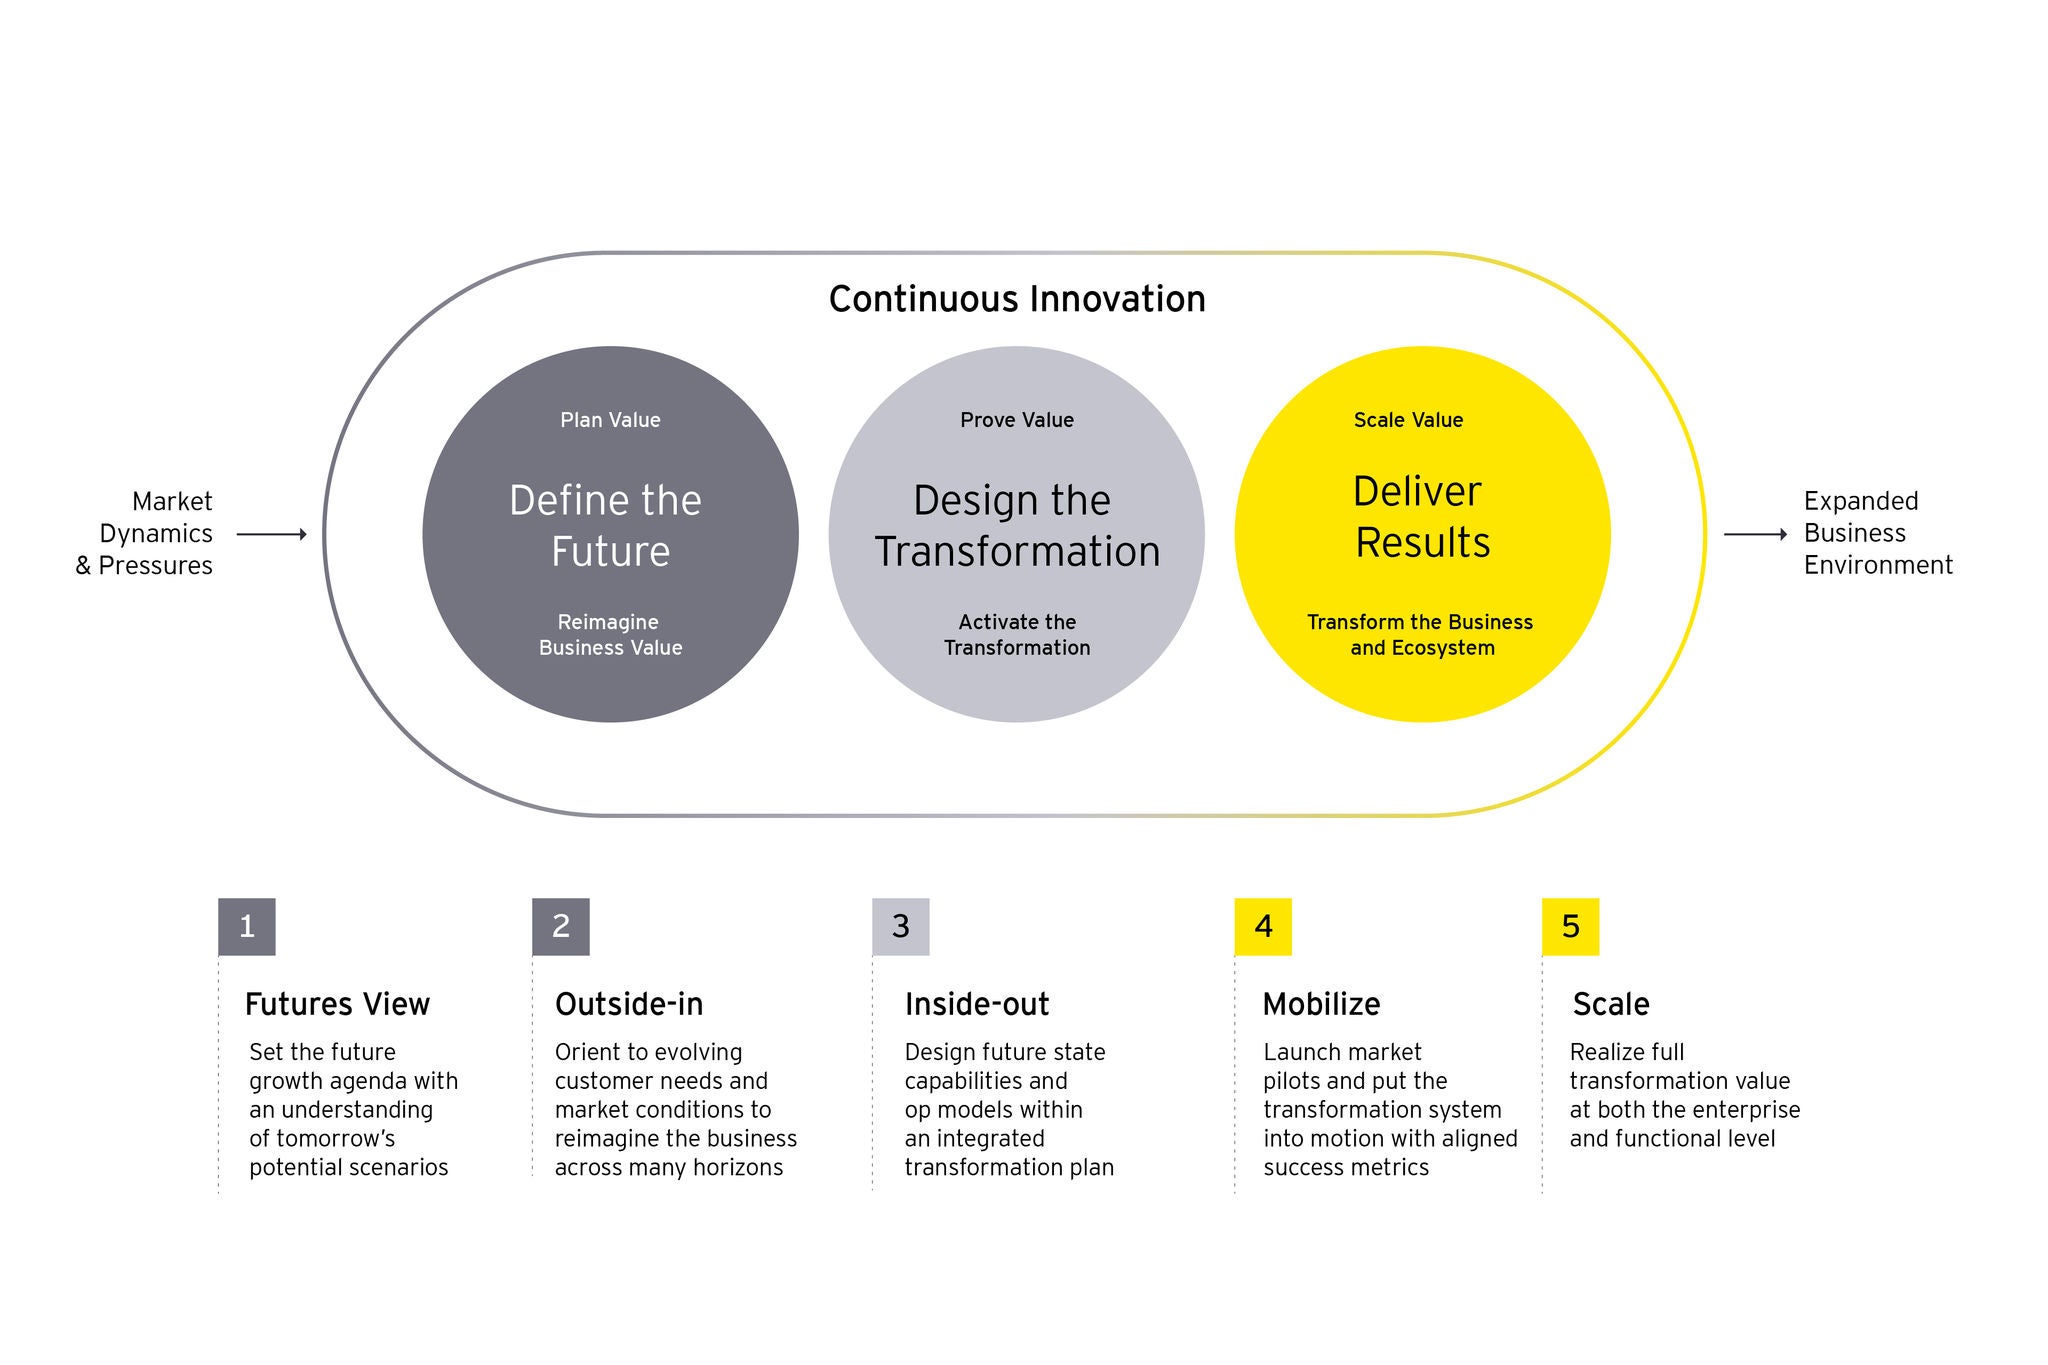 Continuous innovation